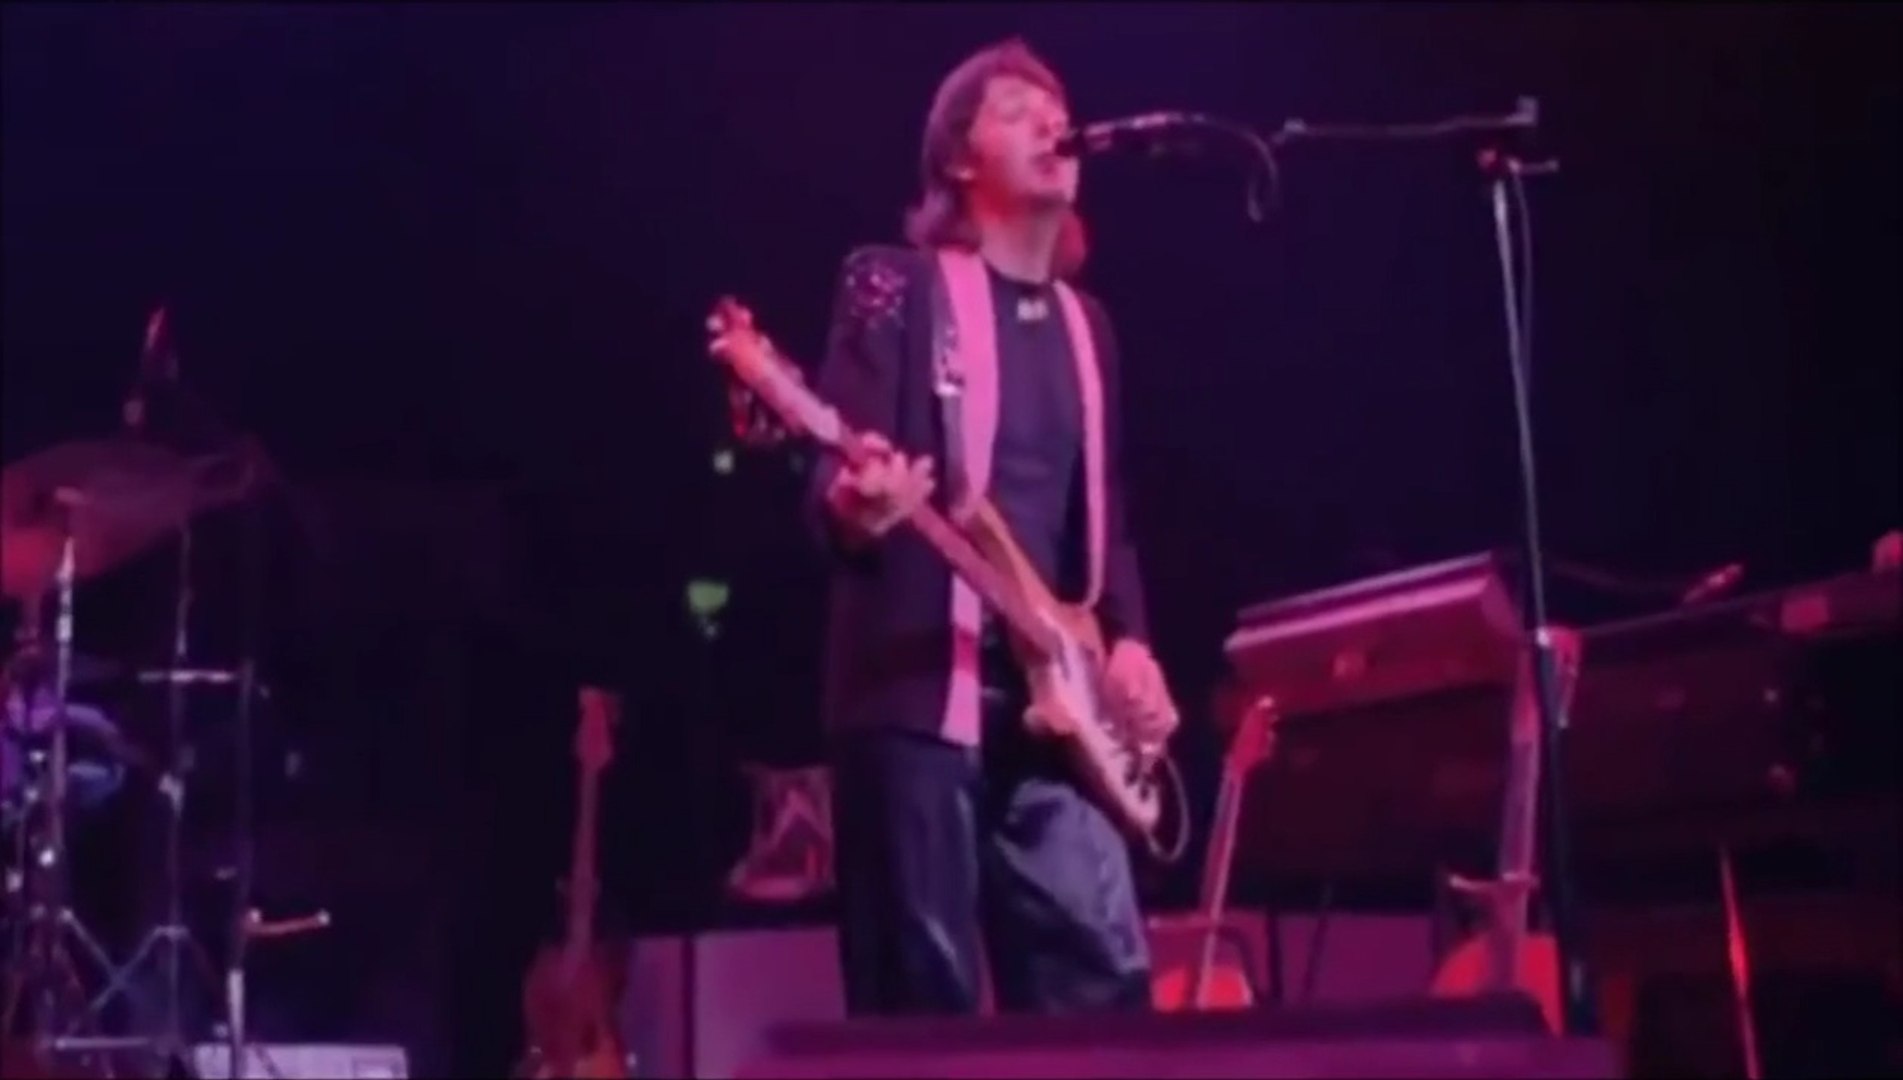 Paul McCartney & Wings - Let Me Roll It (Live) - Vídeo Dailymotion